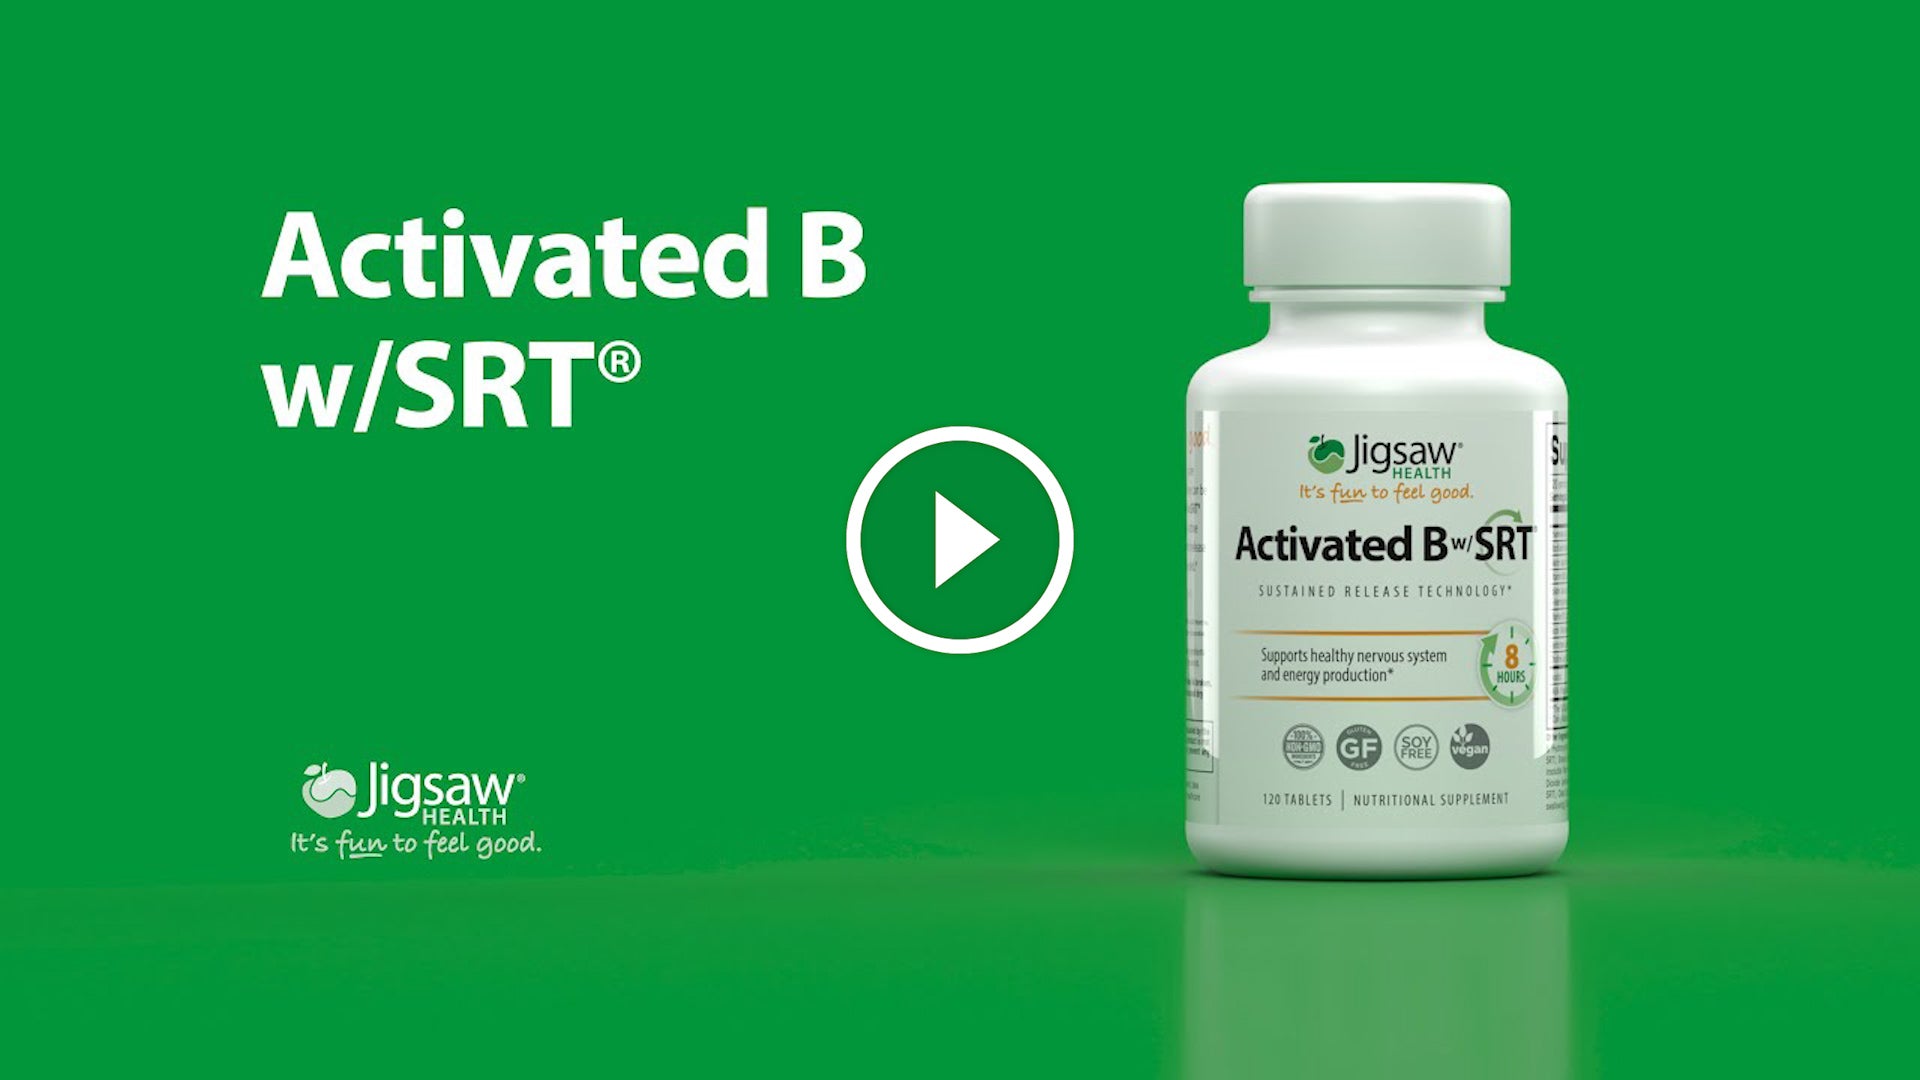 What is Activated B w/SRT?